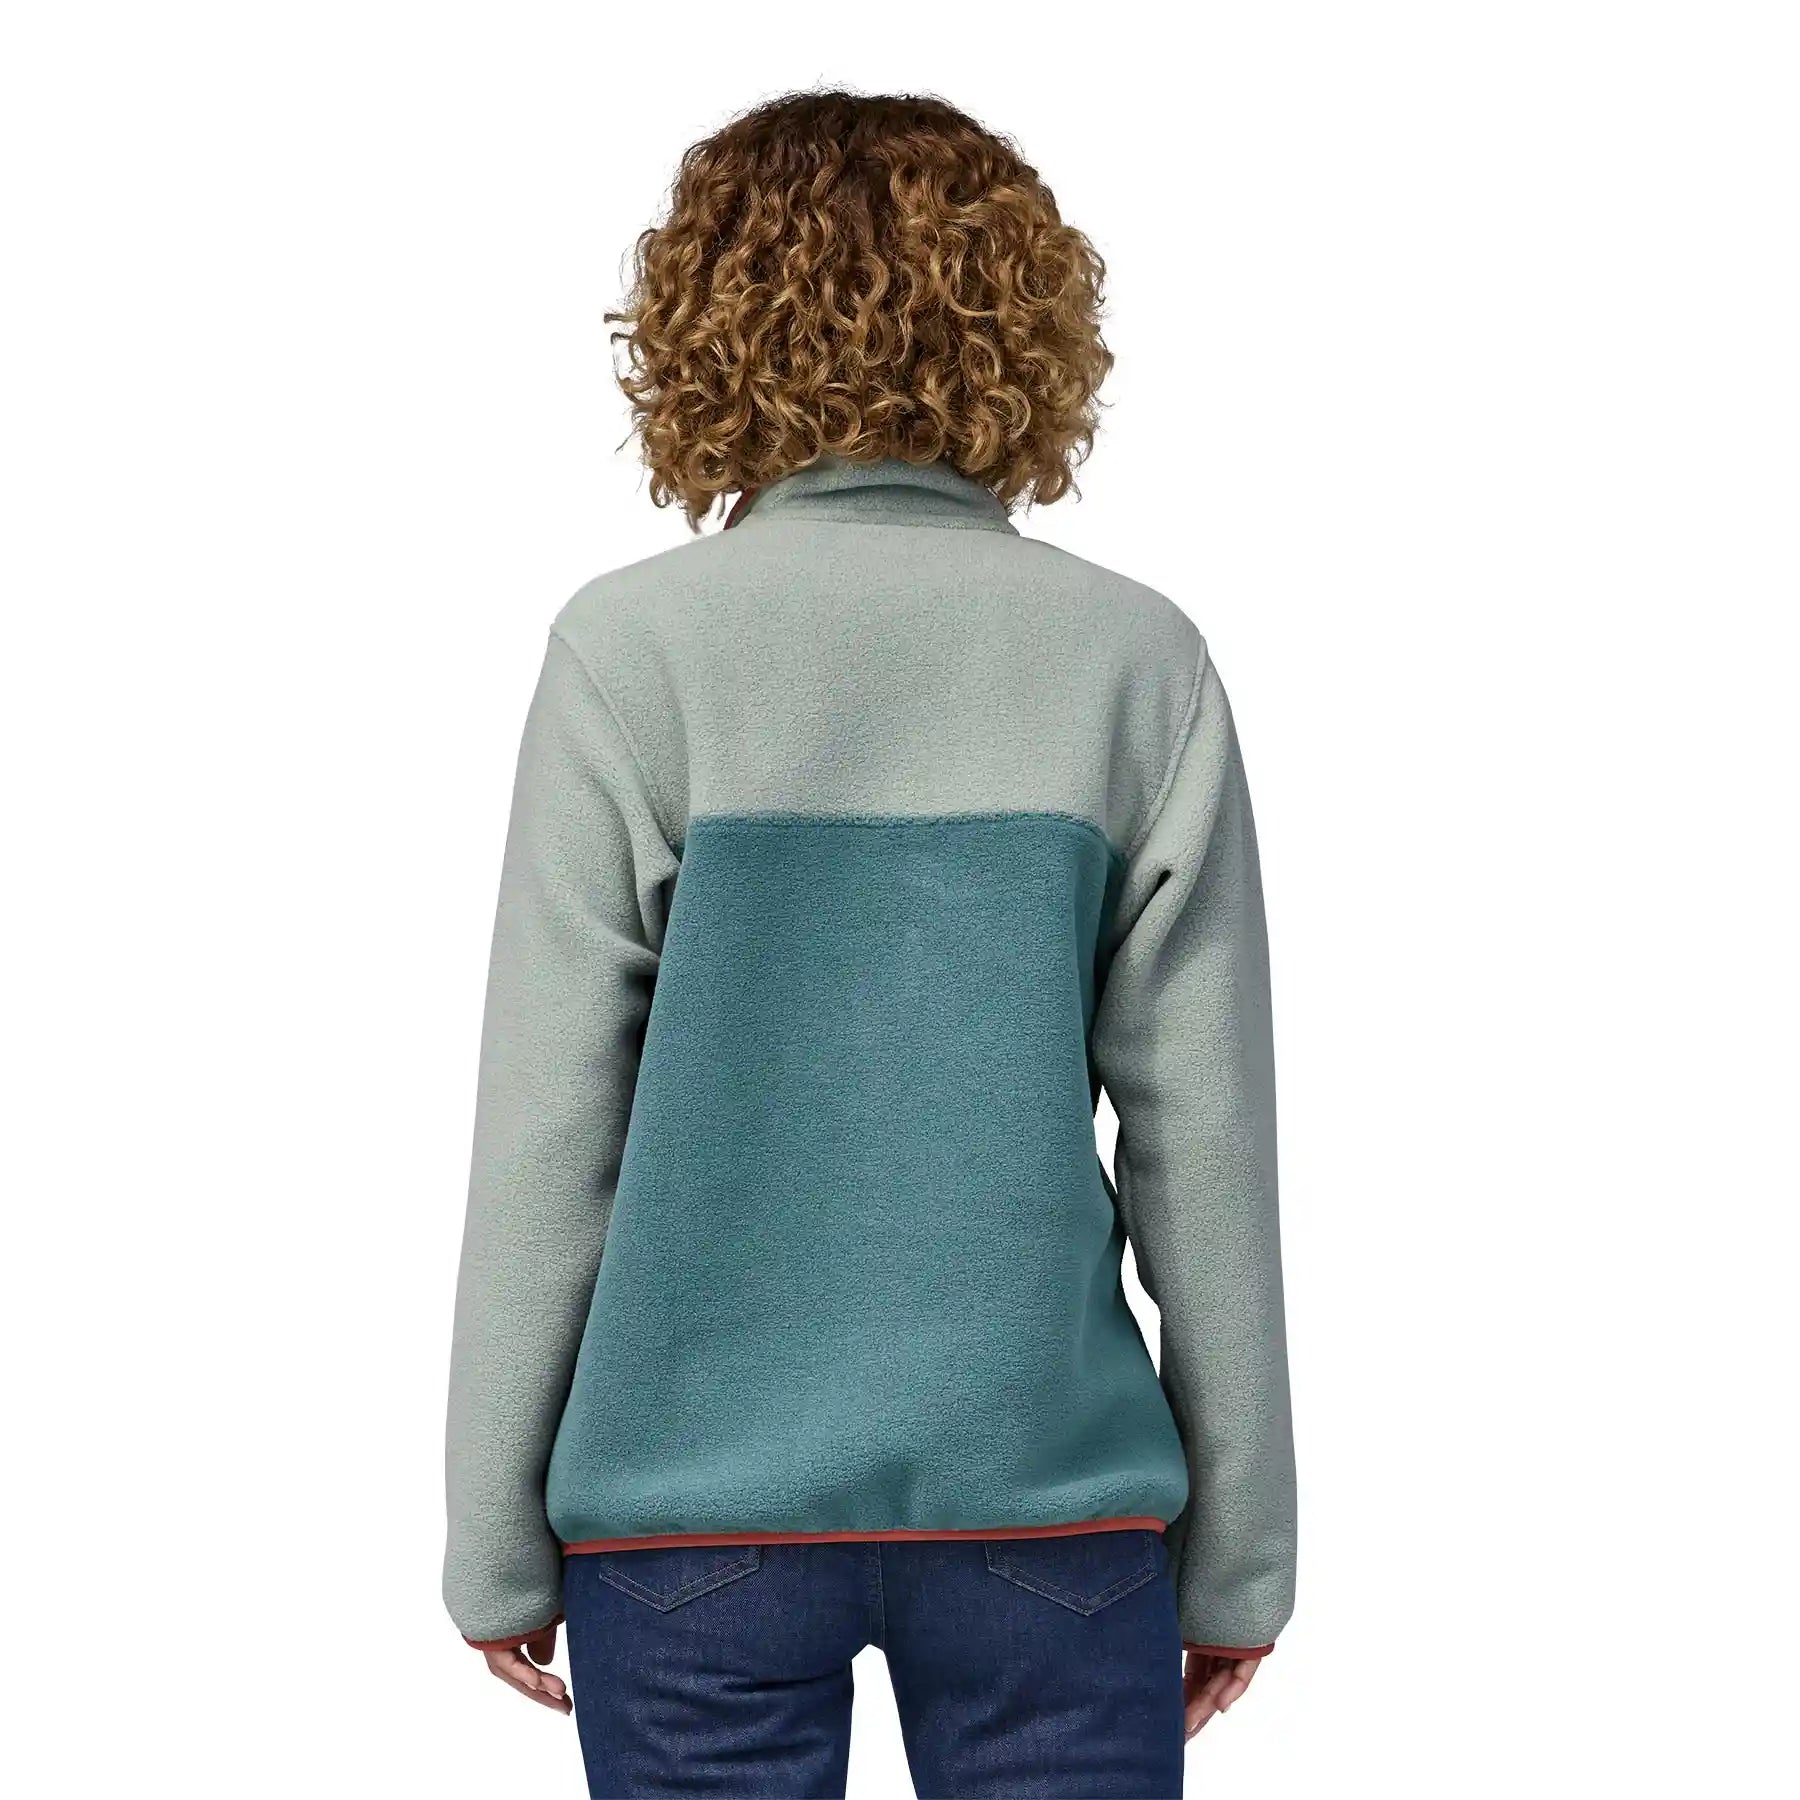 Patagonia Synchilla Snap-T Fleece Oatmeal Heather Teal Womens 25455